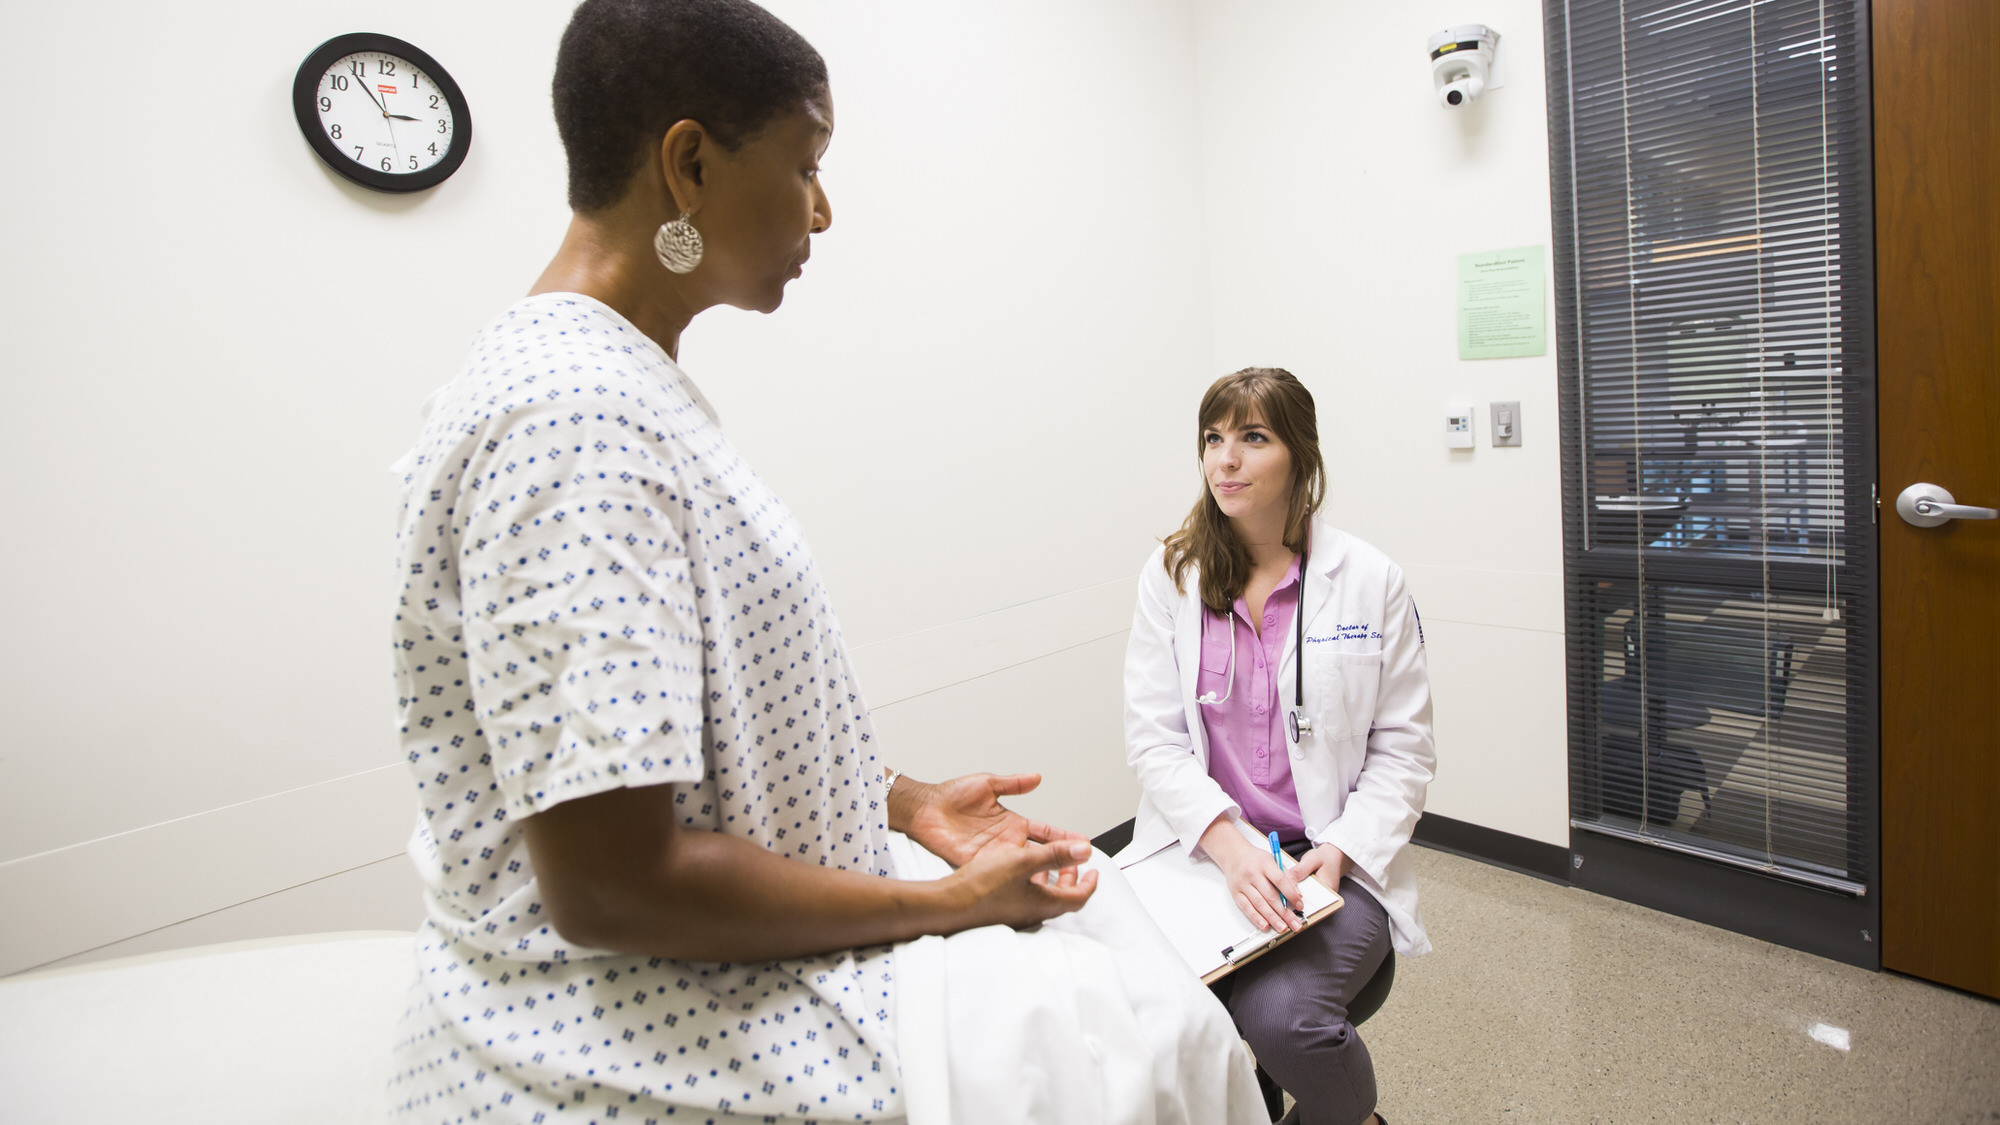 Student talking to patient